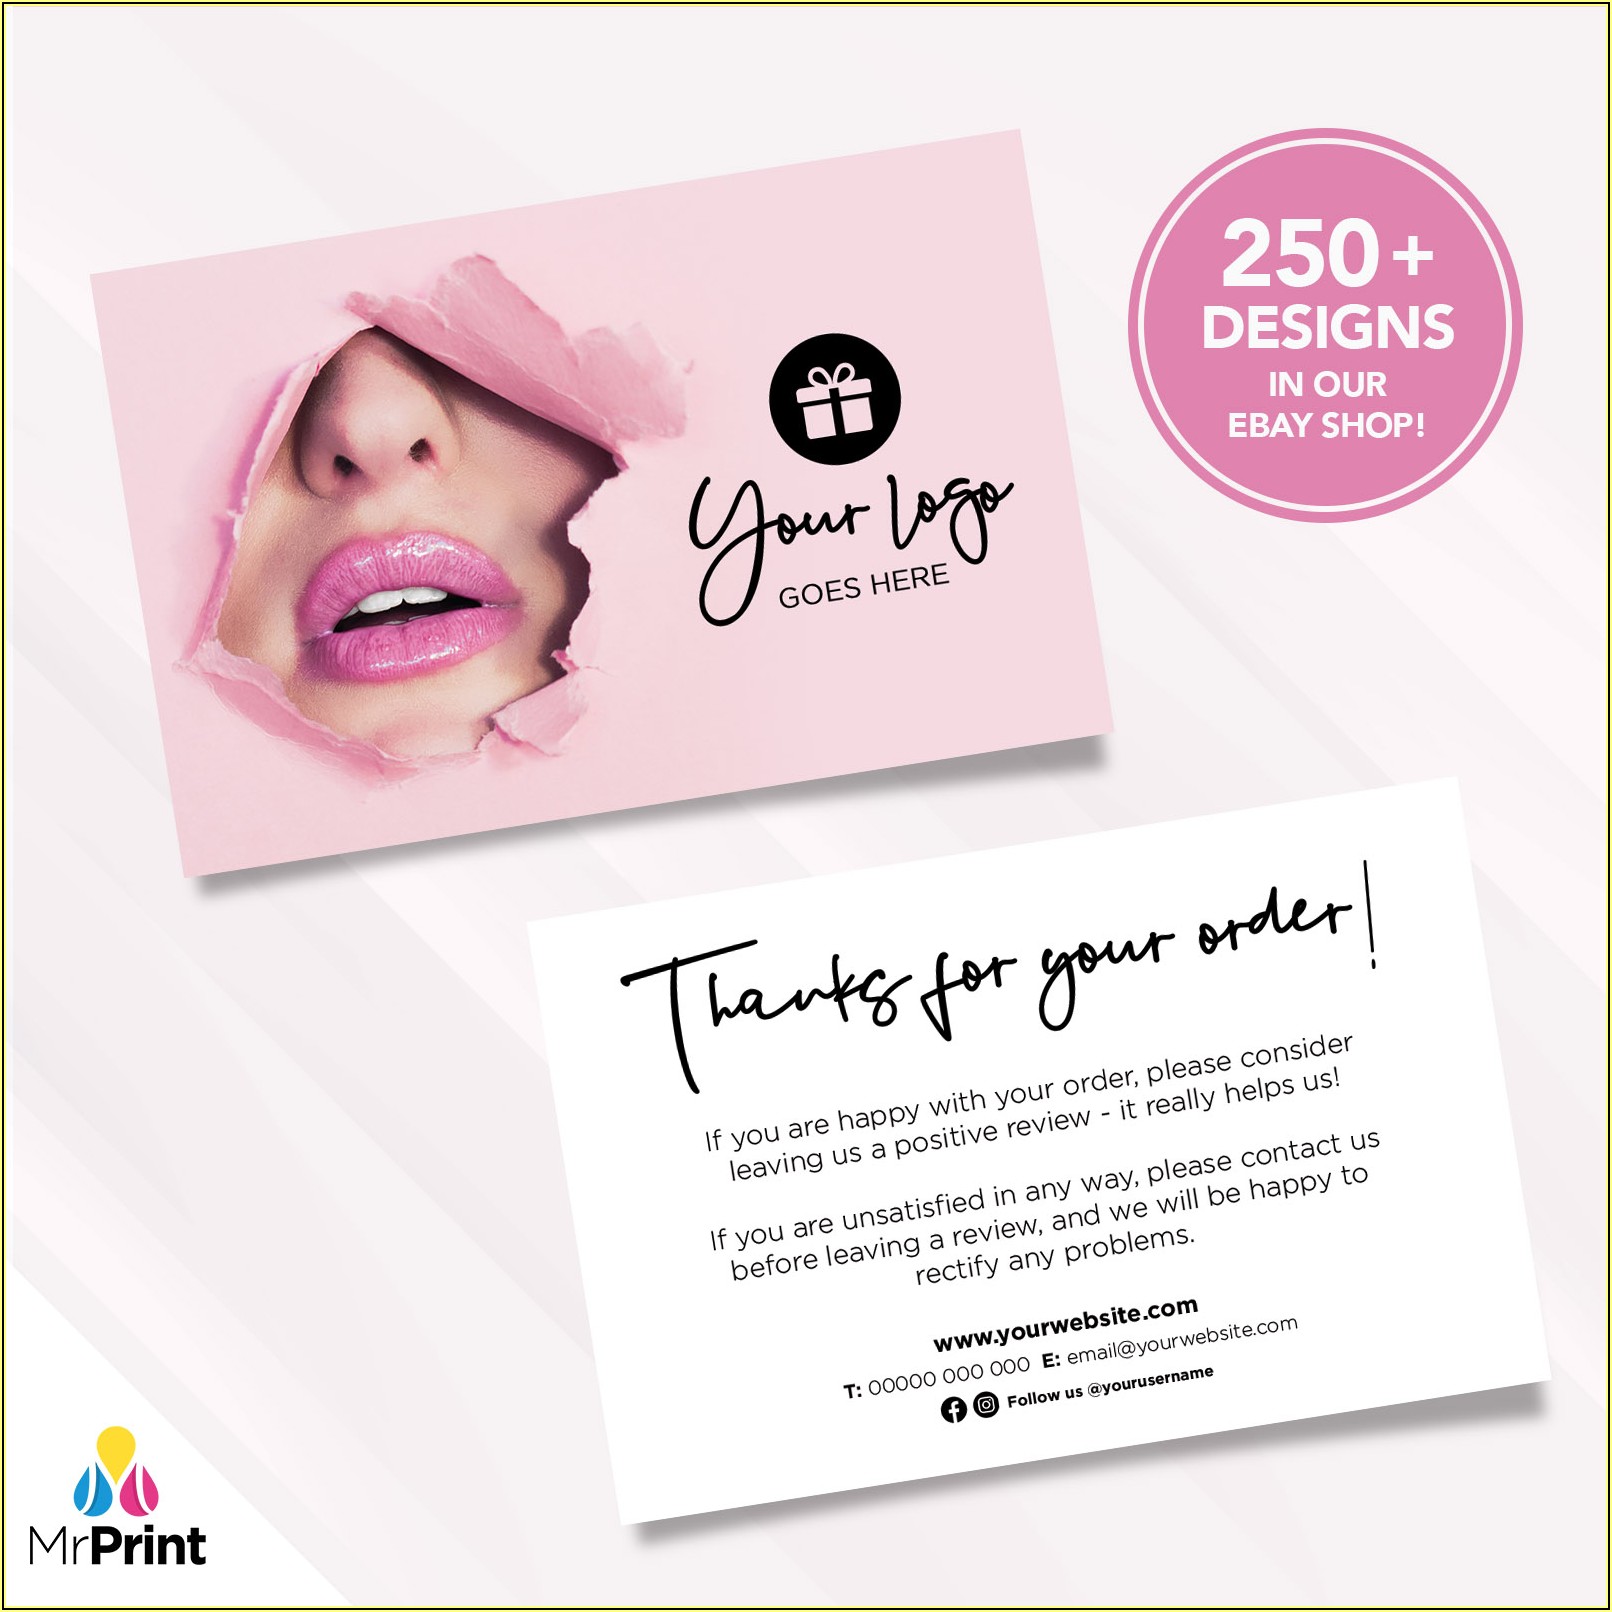 1000 Business Cards For 6.99